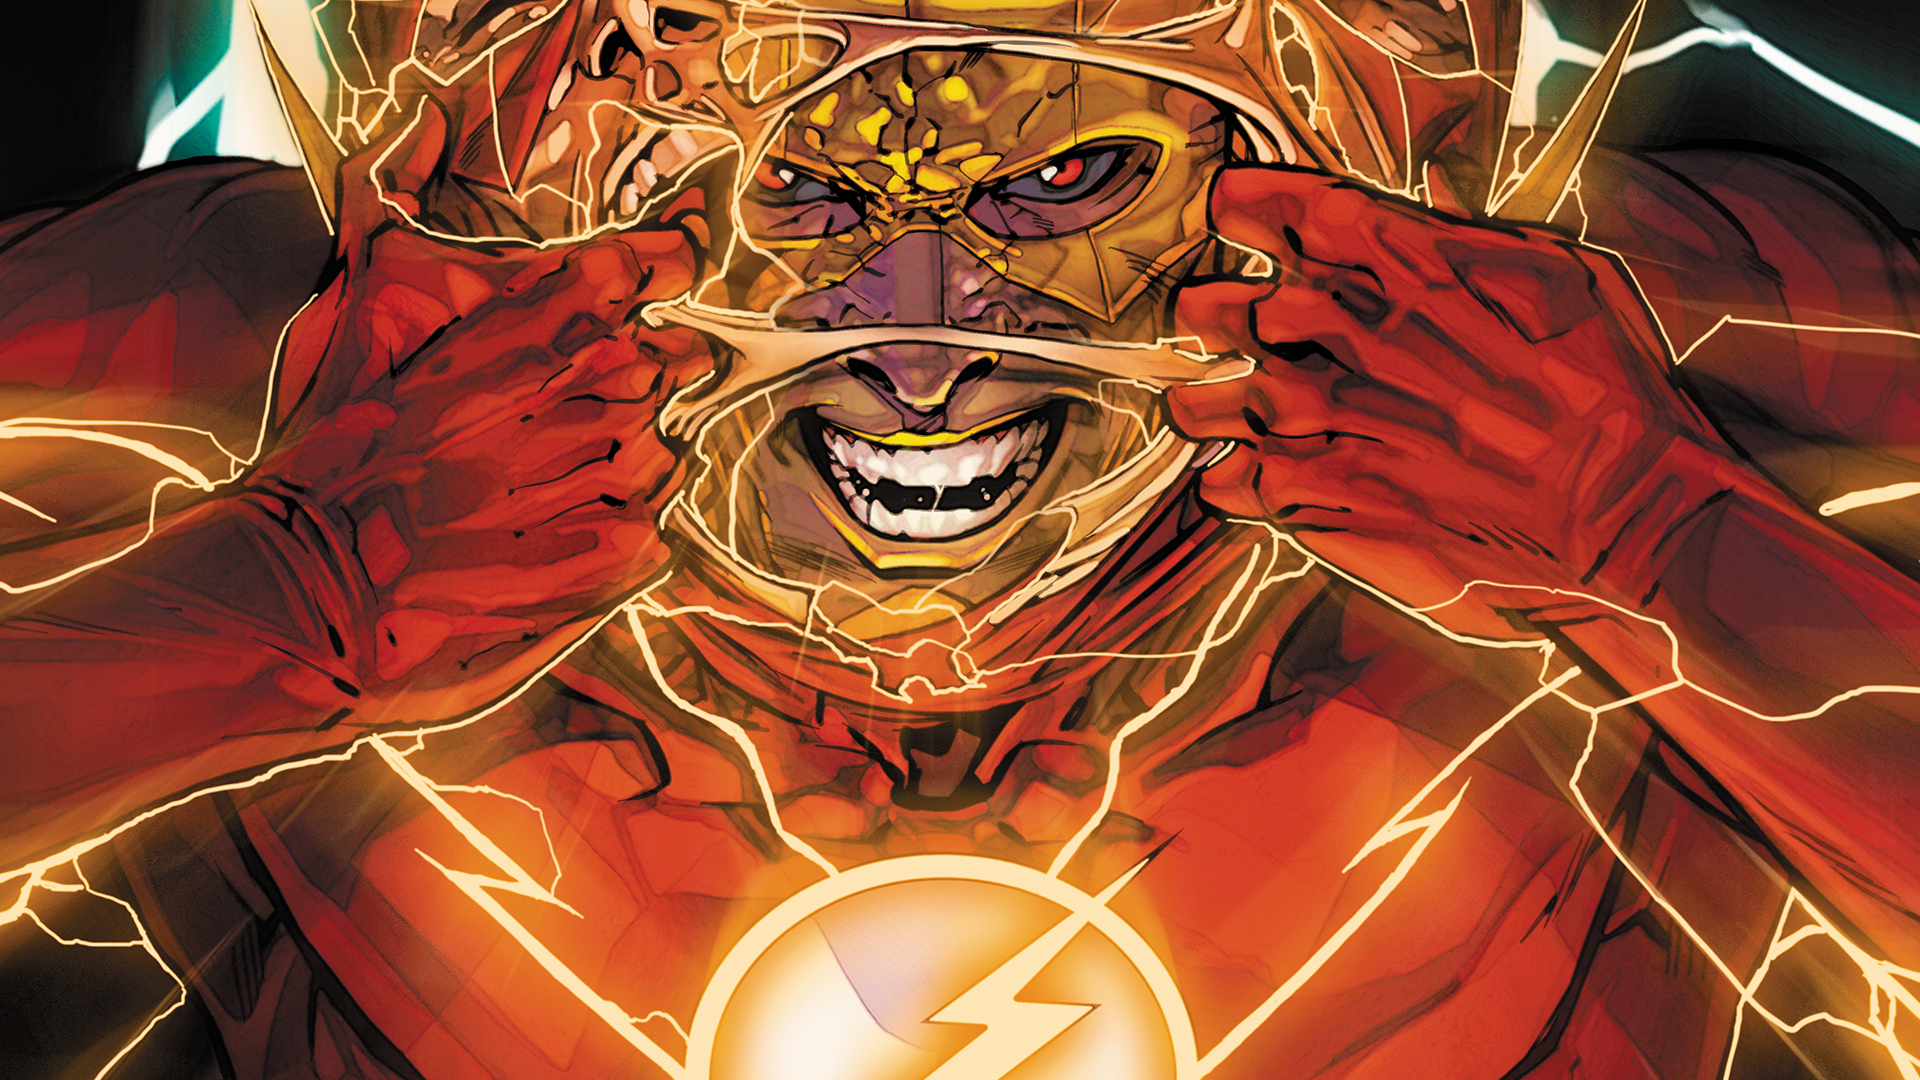 THE FLASH VOL. 4: RUNNING SCARED | DC